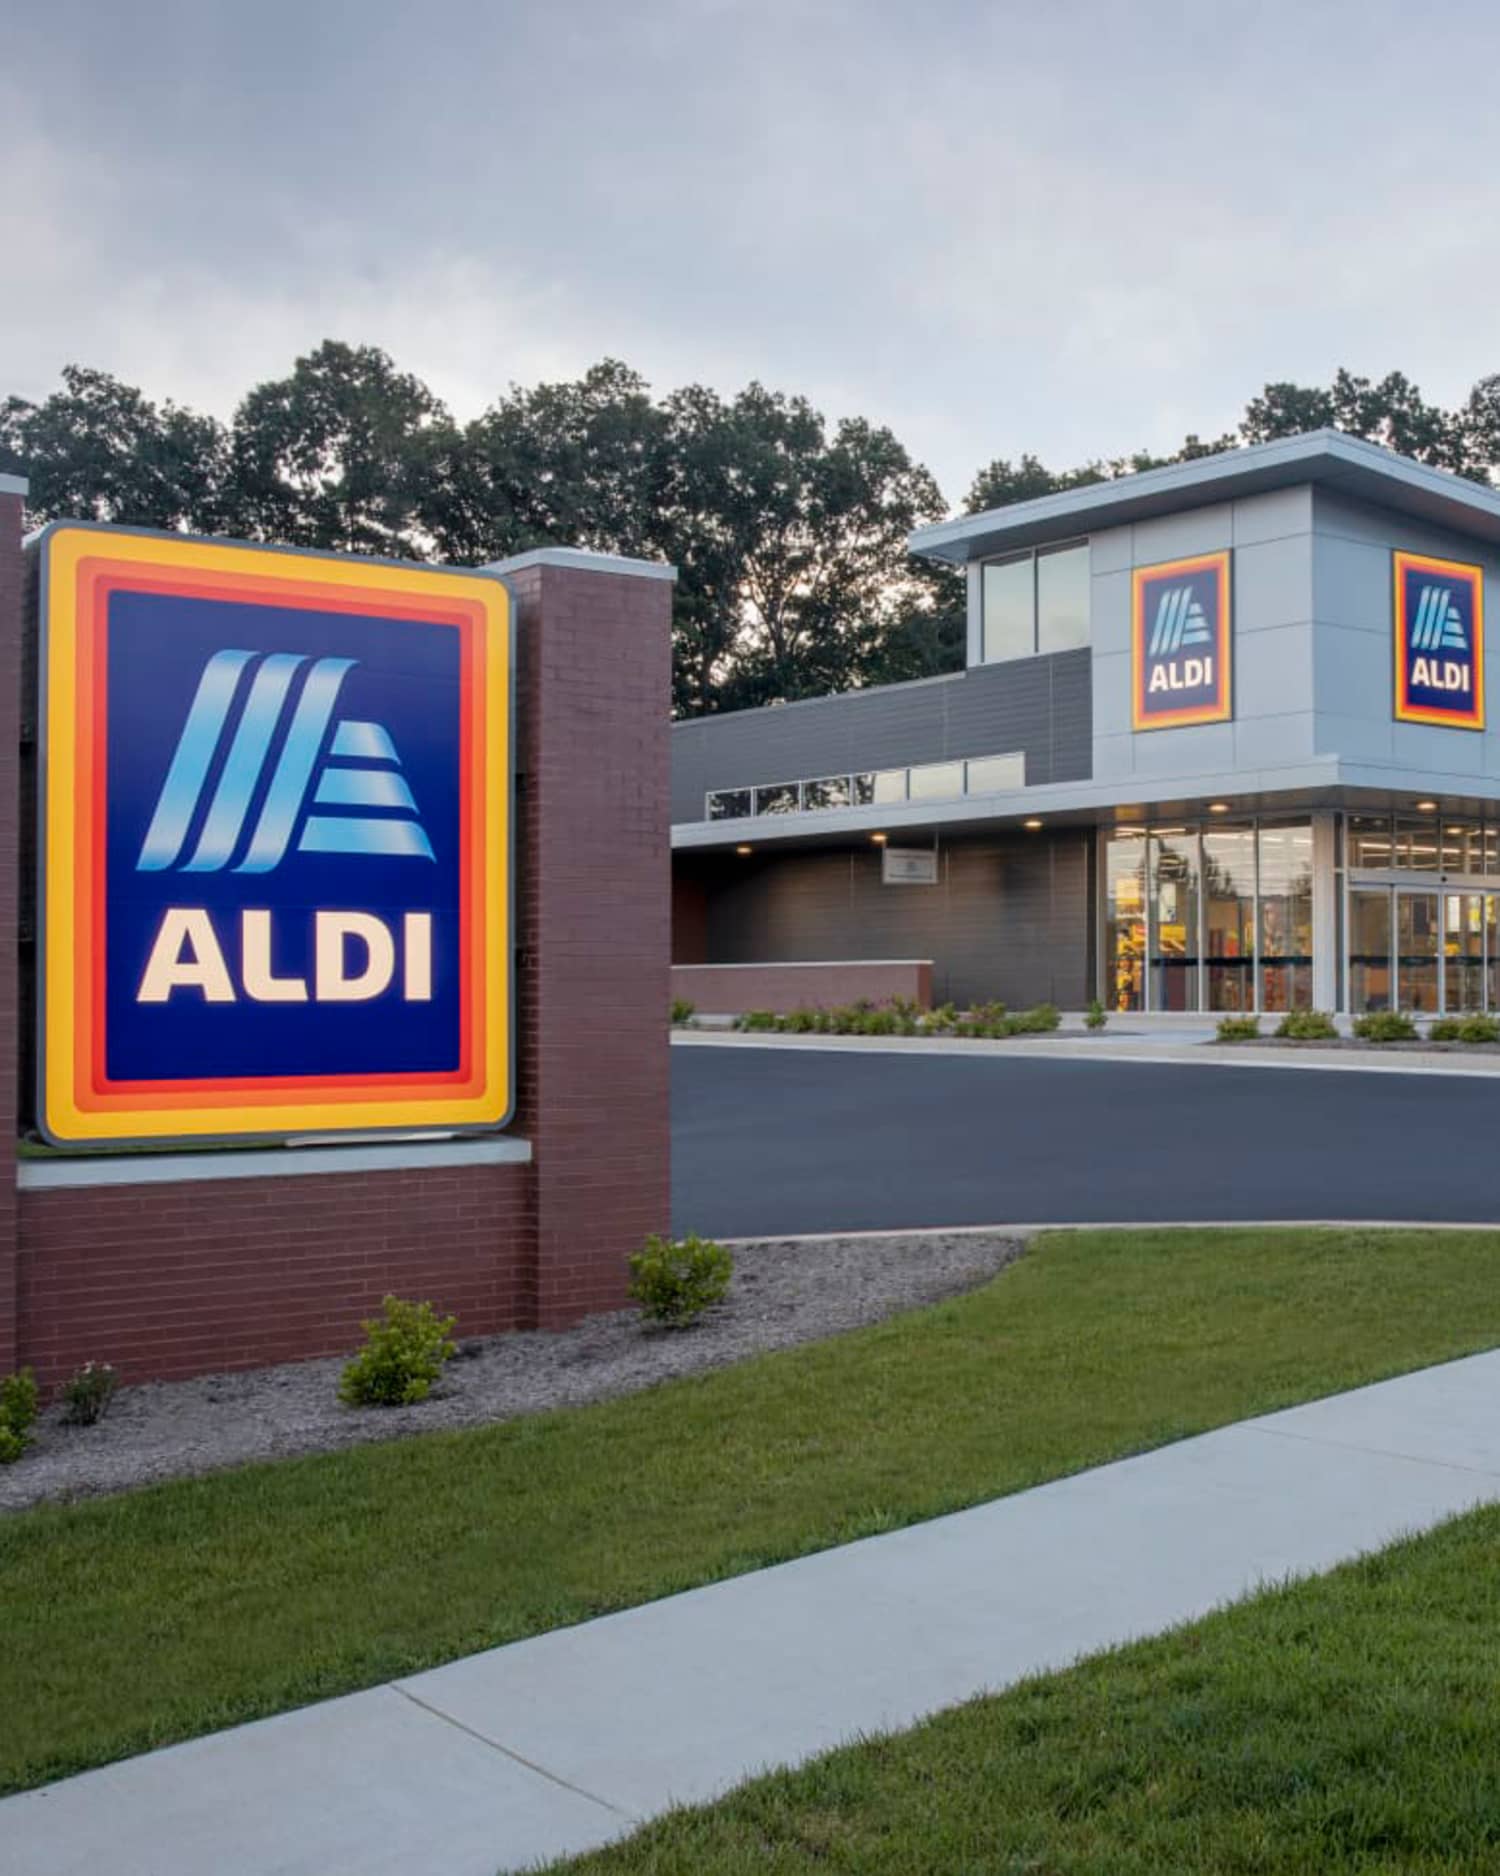 BRB, Running to Aldi For These Just-Leaked New Home and Garden Products